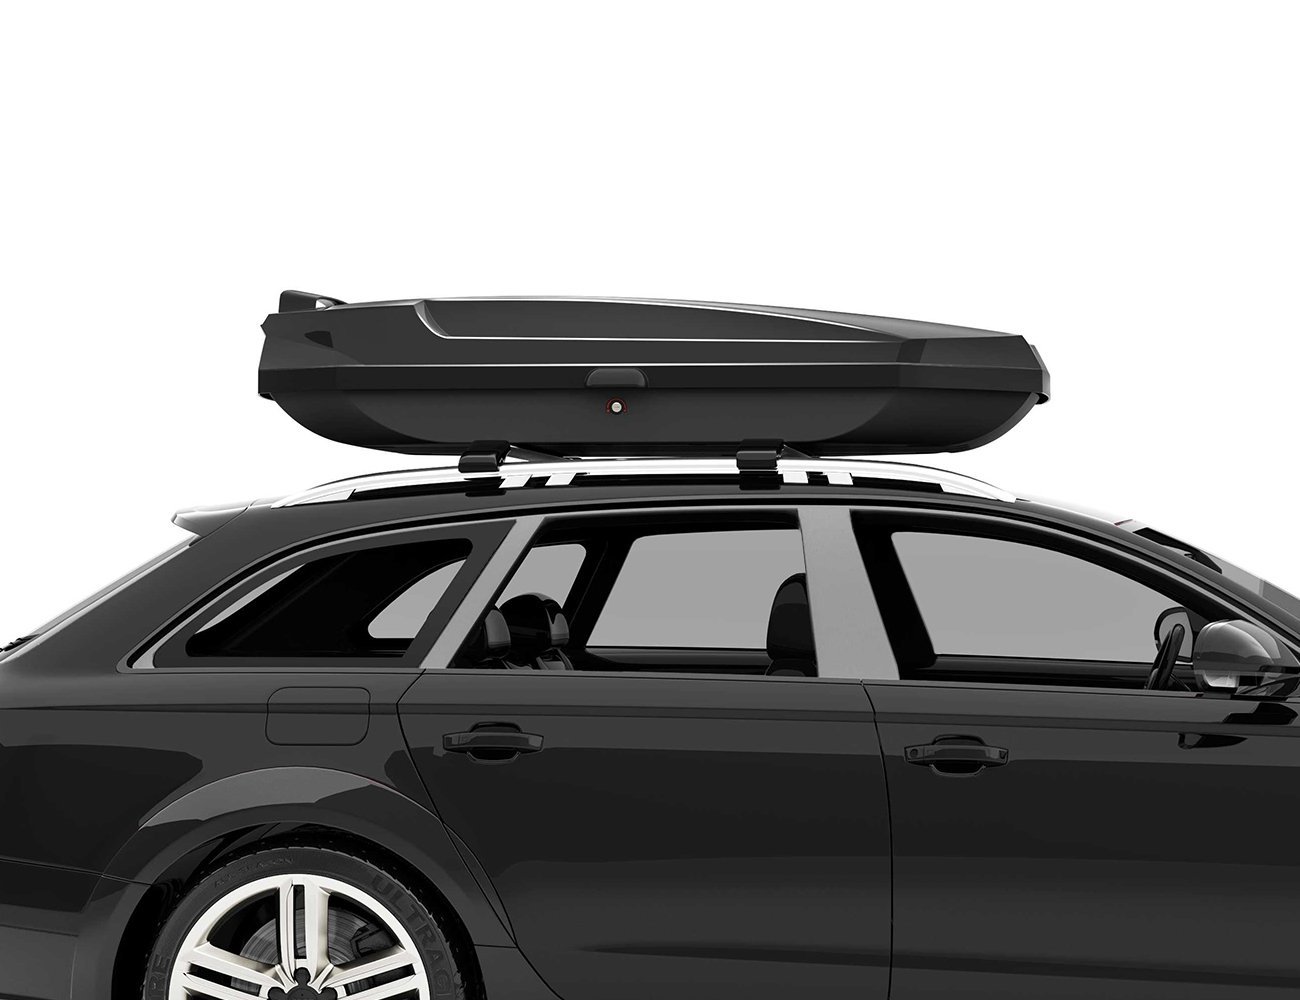 Slimline Car Roof Box - 850L @ Crazy Sales - We have the best daily ...